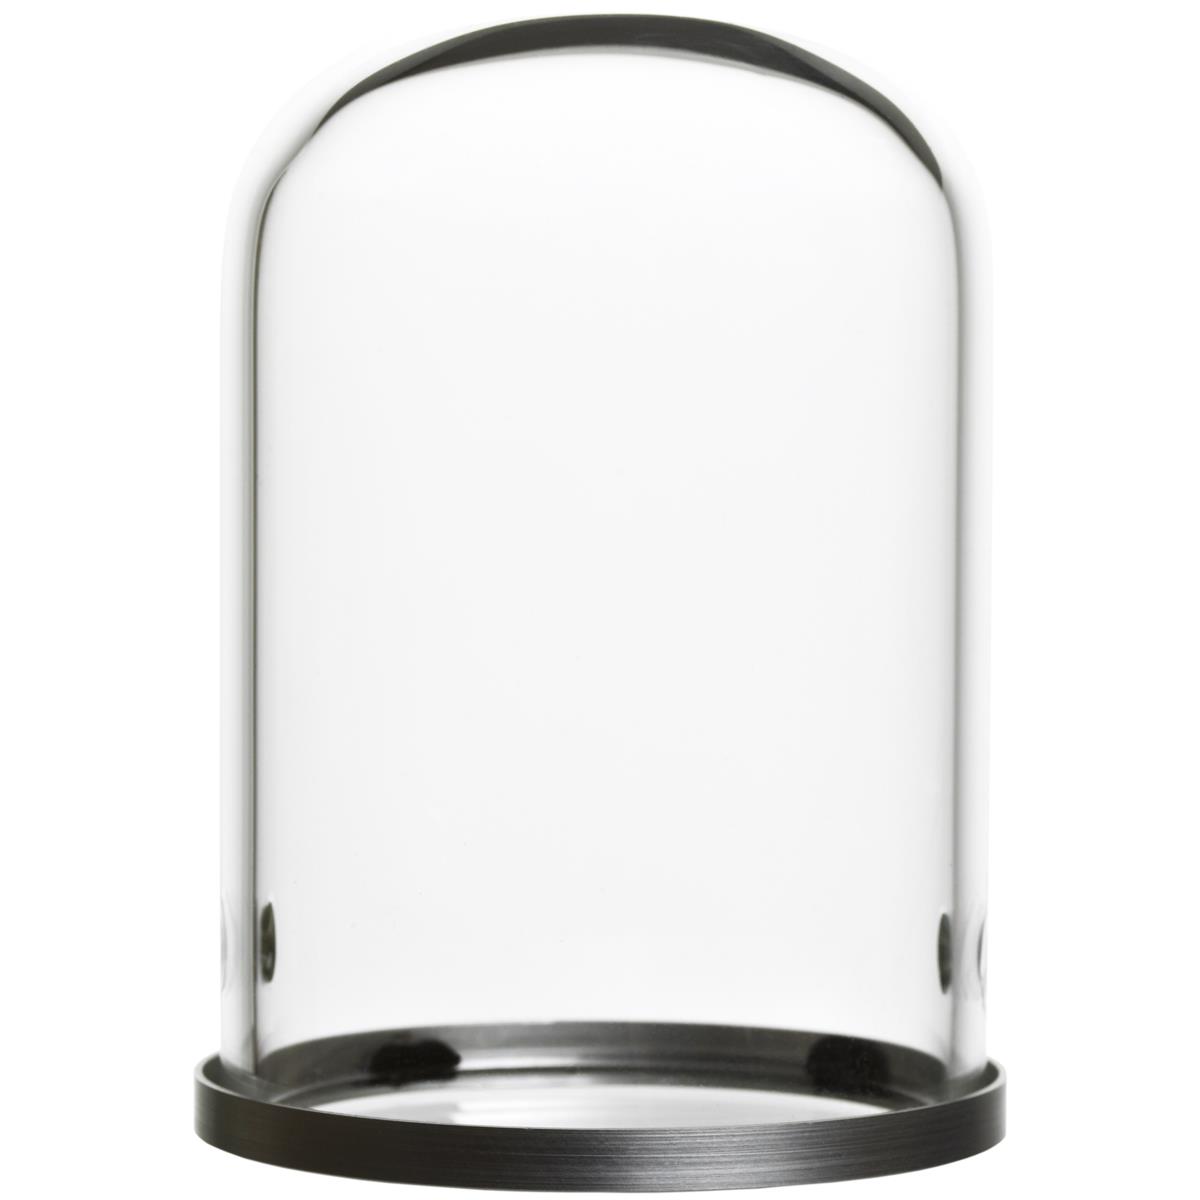 Buy Profoto Glass Cover 70 mm Clear online